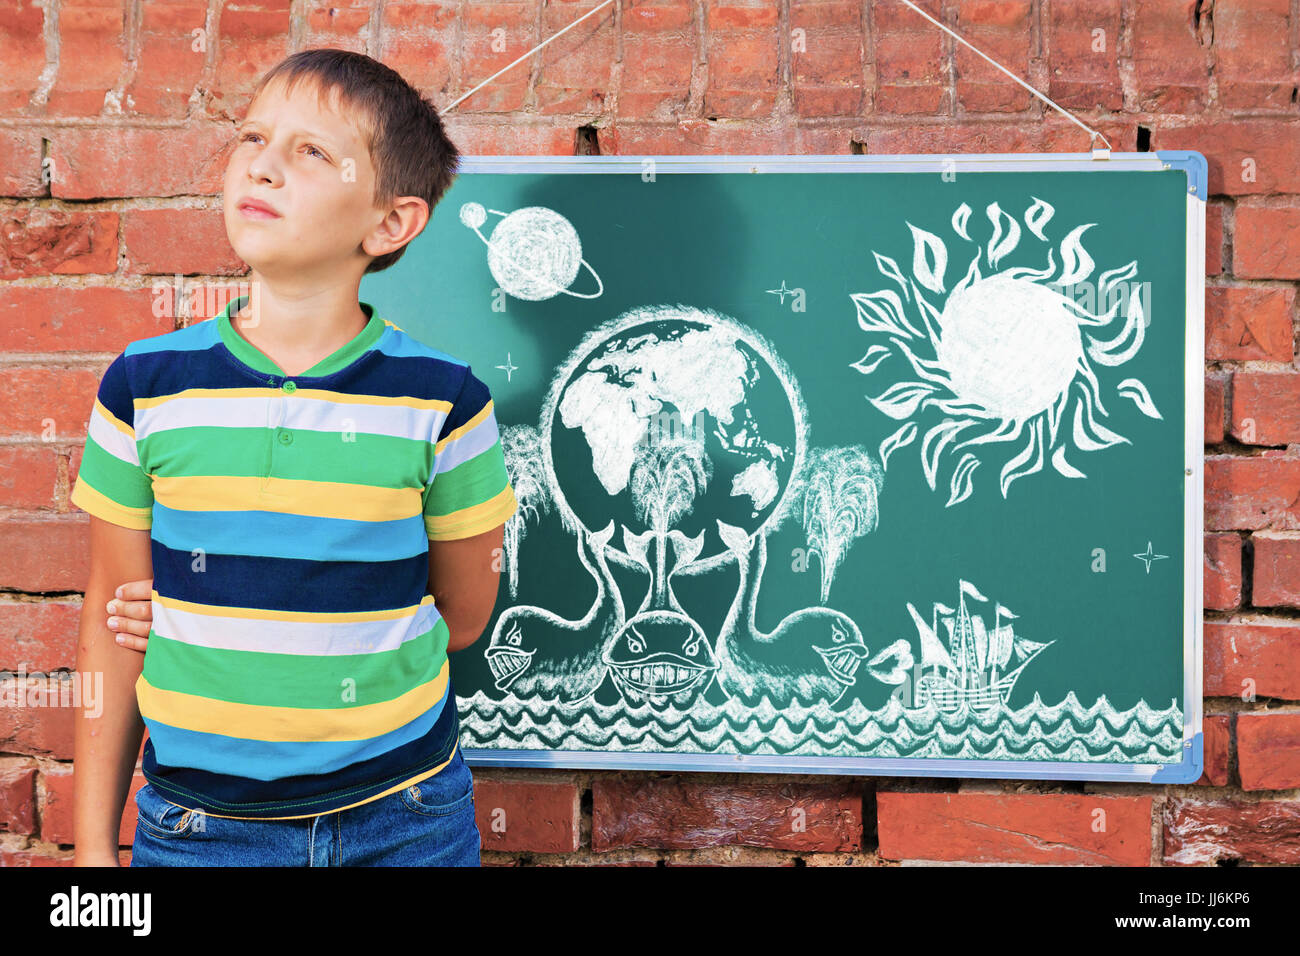 Meditative boy near chalkboard with drawing Earth map on three whales in the improvised outdoor class Stock Photo